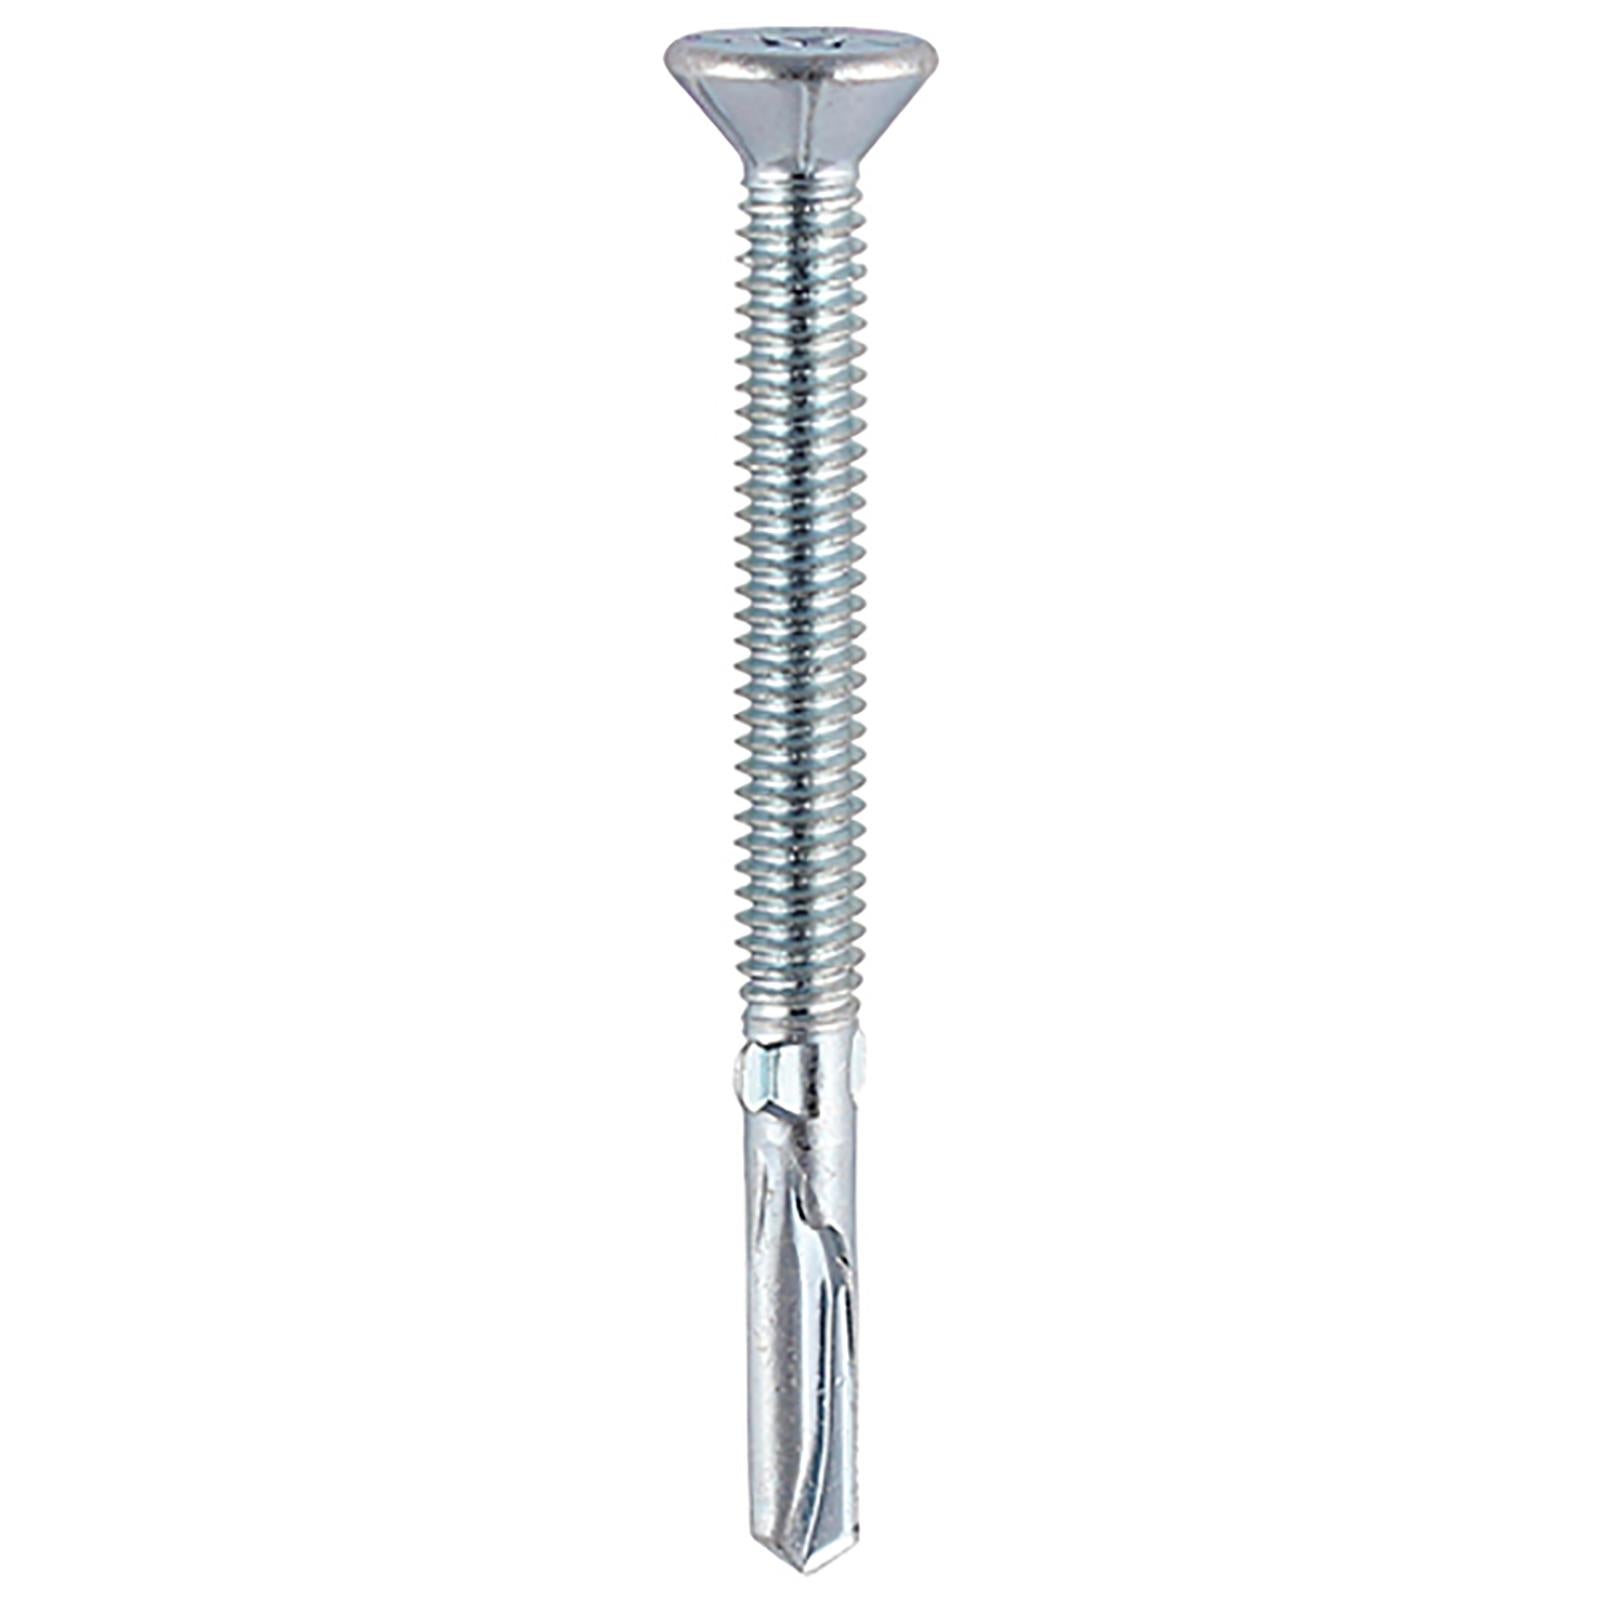 TIMCO Metal Construction TEK Screws Timber to Heavy Section Wing Tip Countersunk